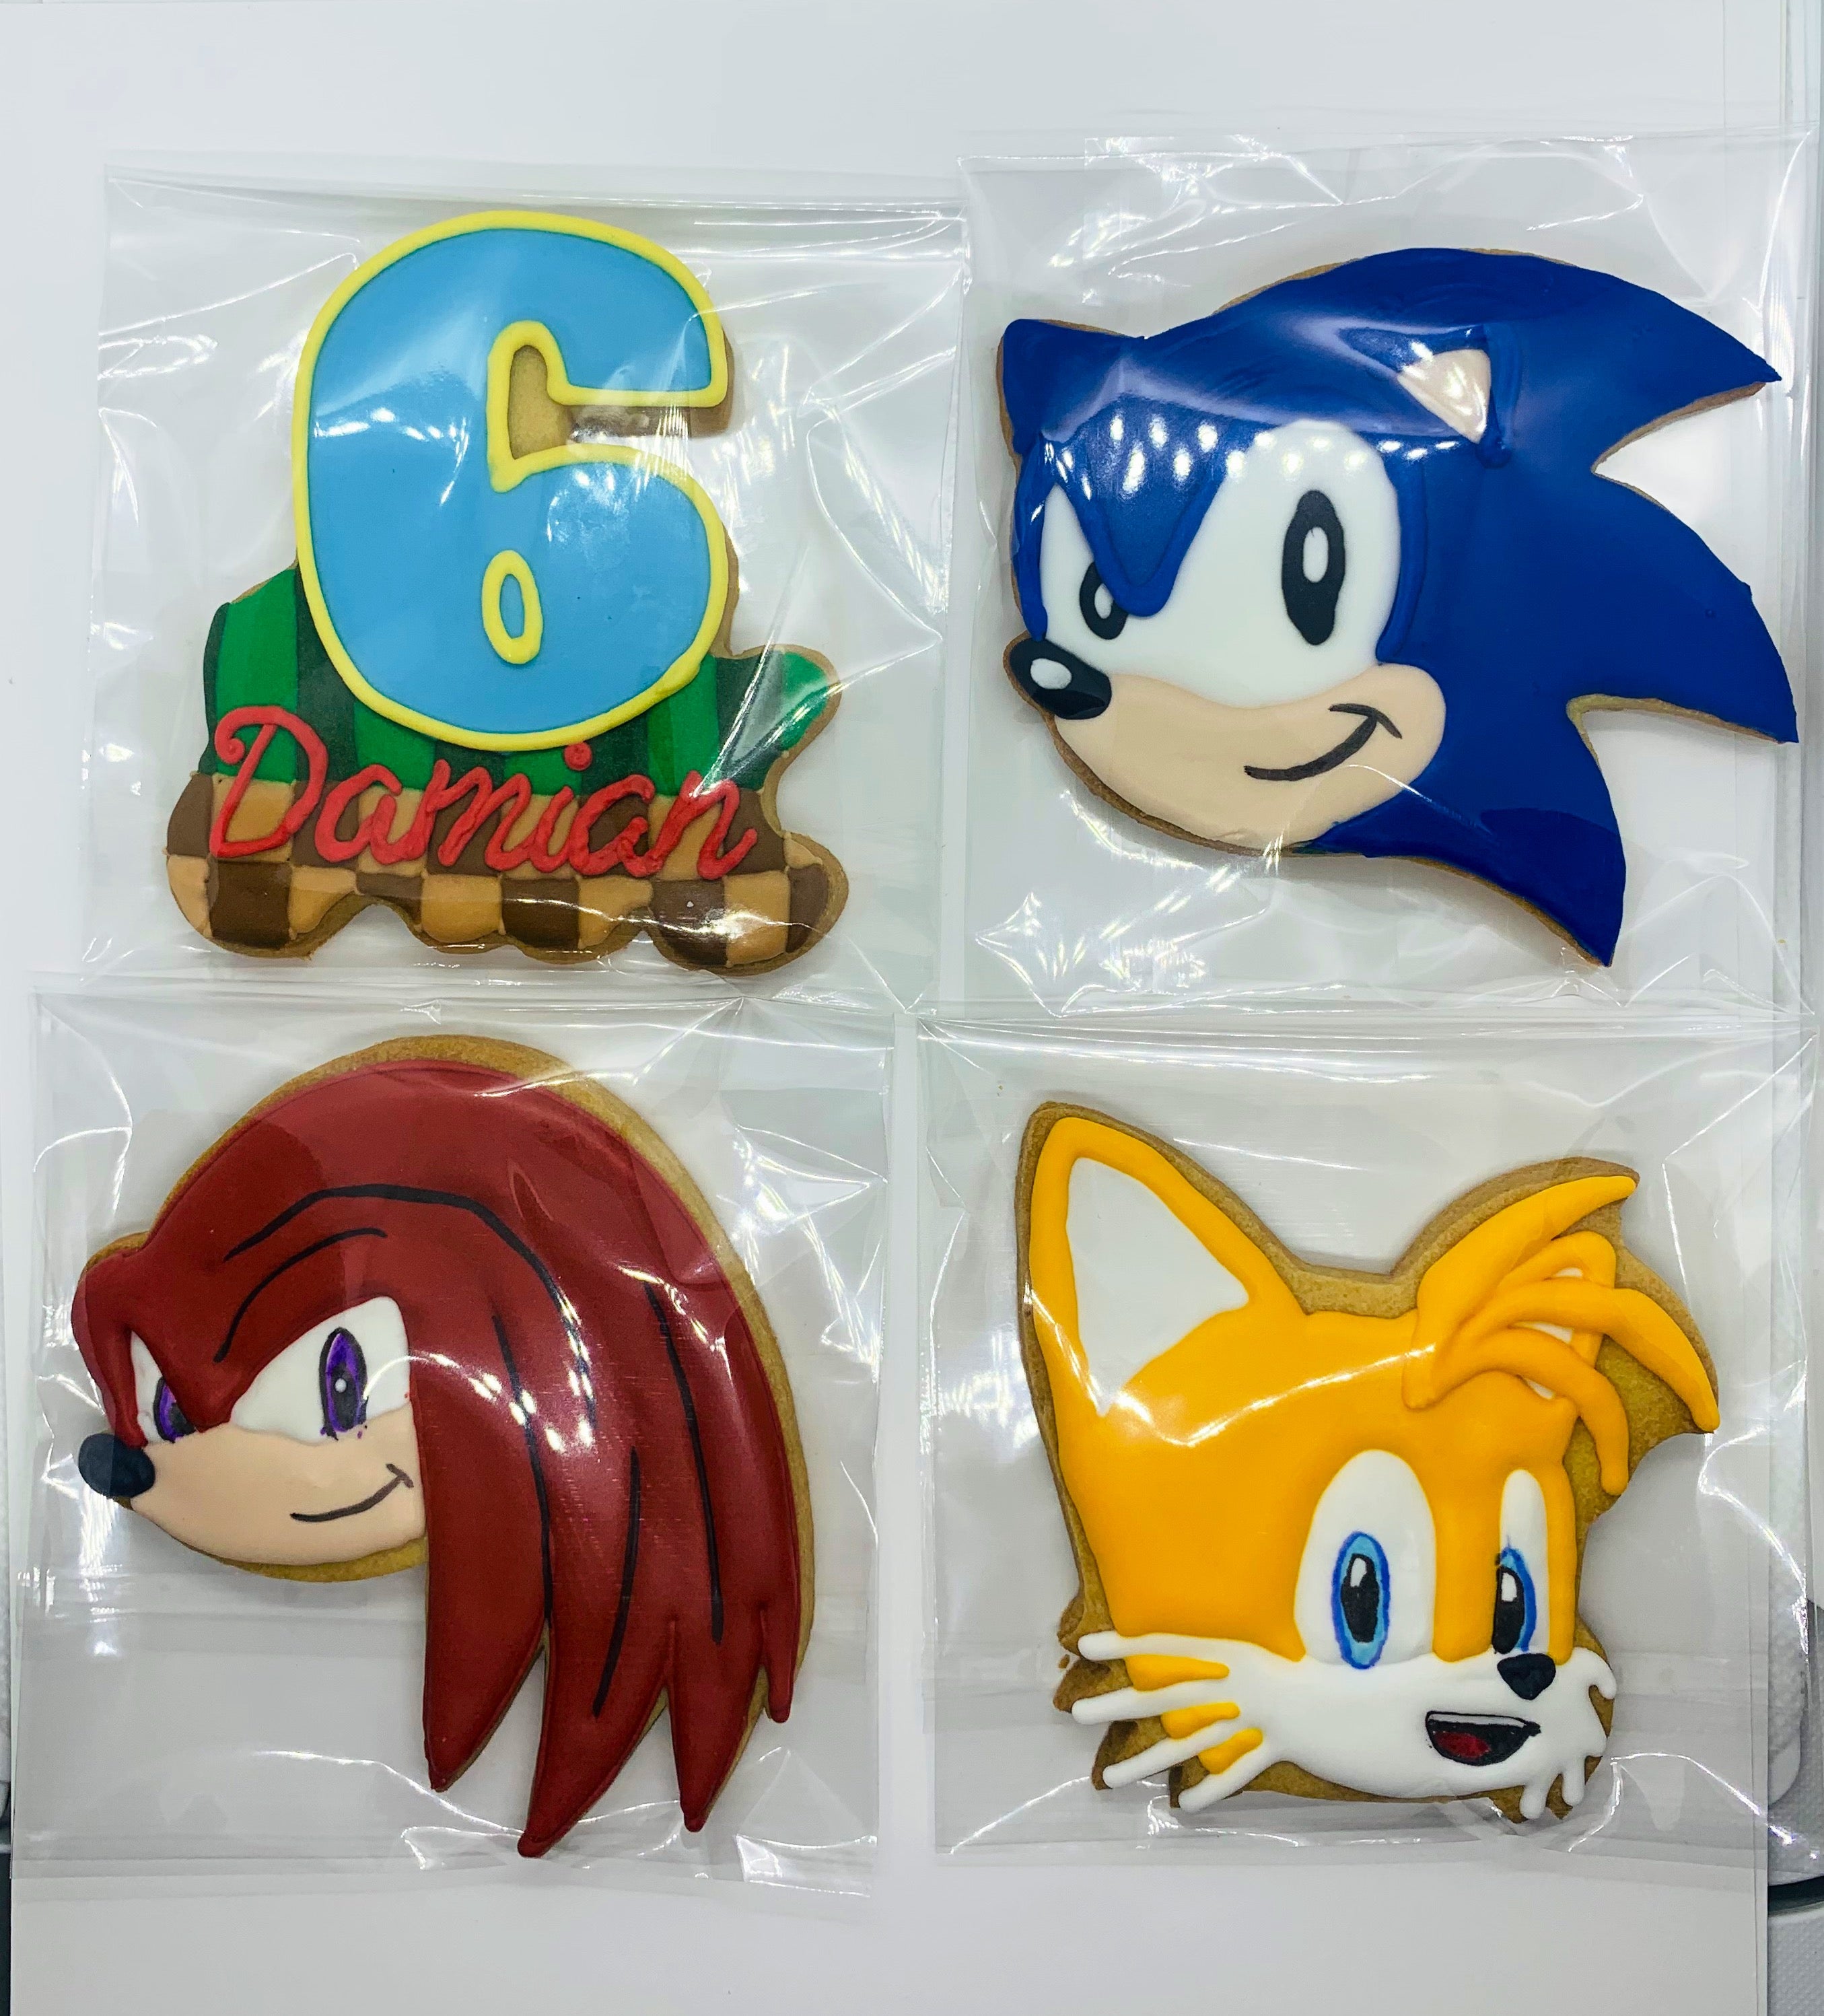 Sonic cookies, Sonic the hedgehog, Personalized cookies, Party favors, Sonic Party, Tails, Knuckles, Eggman